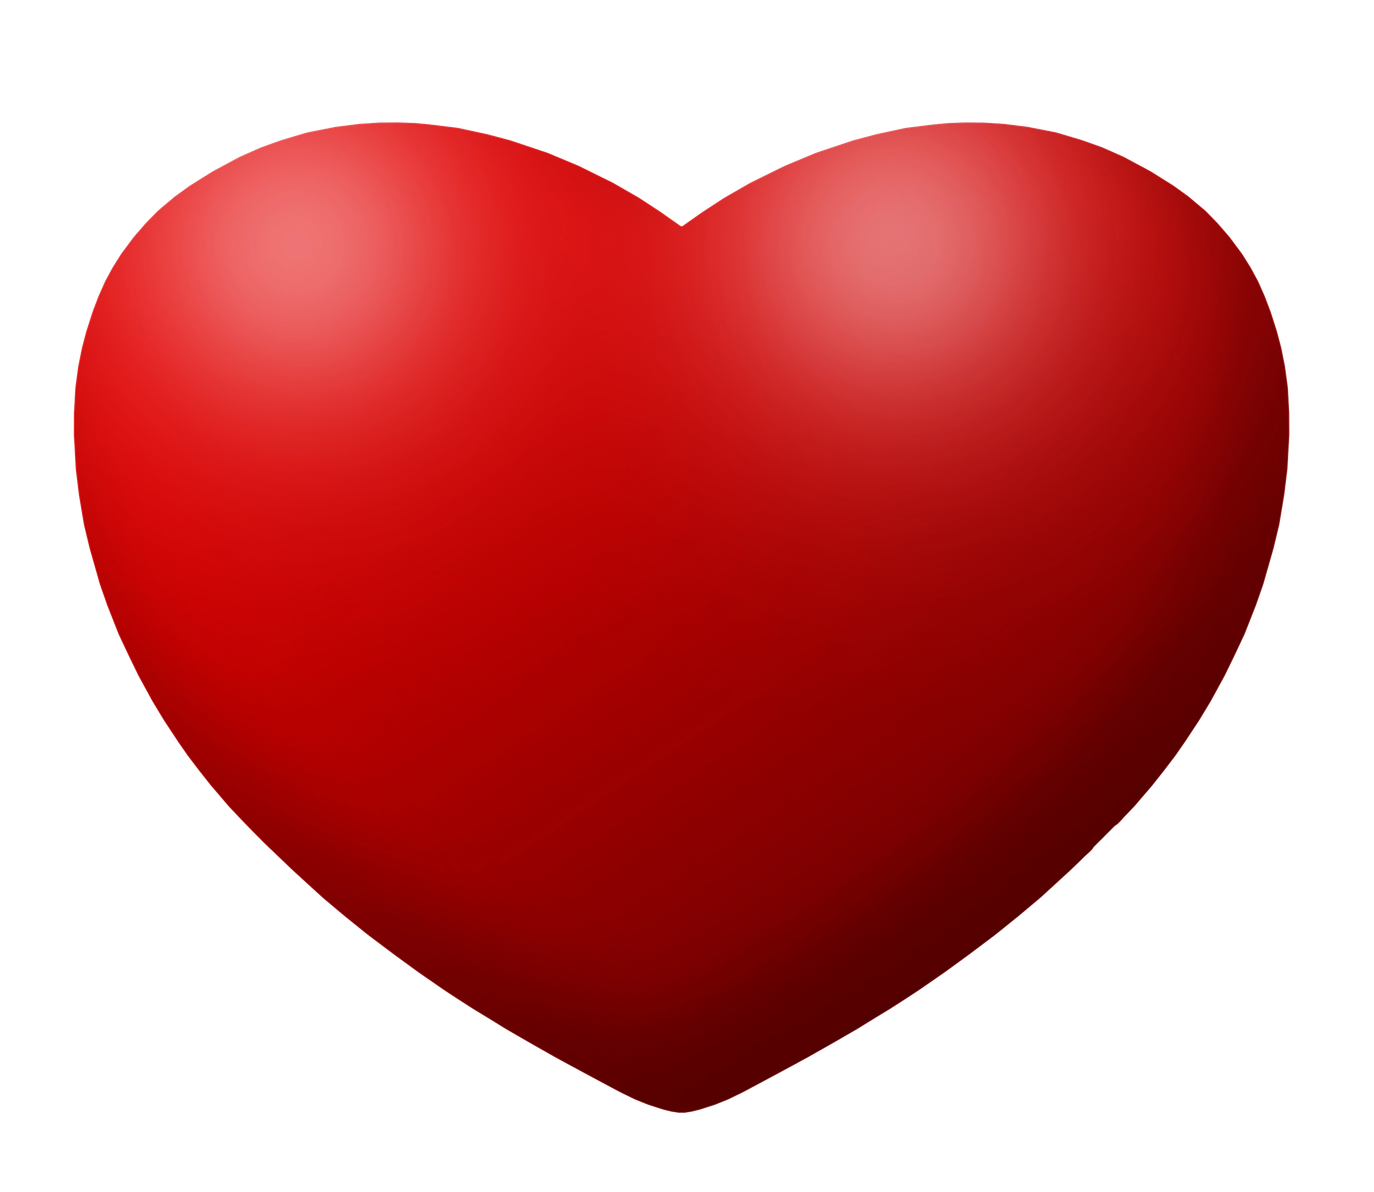 Red Heart Vector Png Transparent Image (black, maroon)